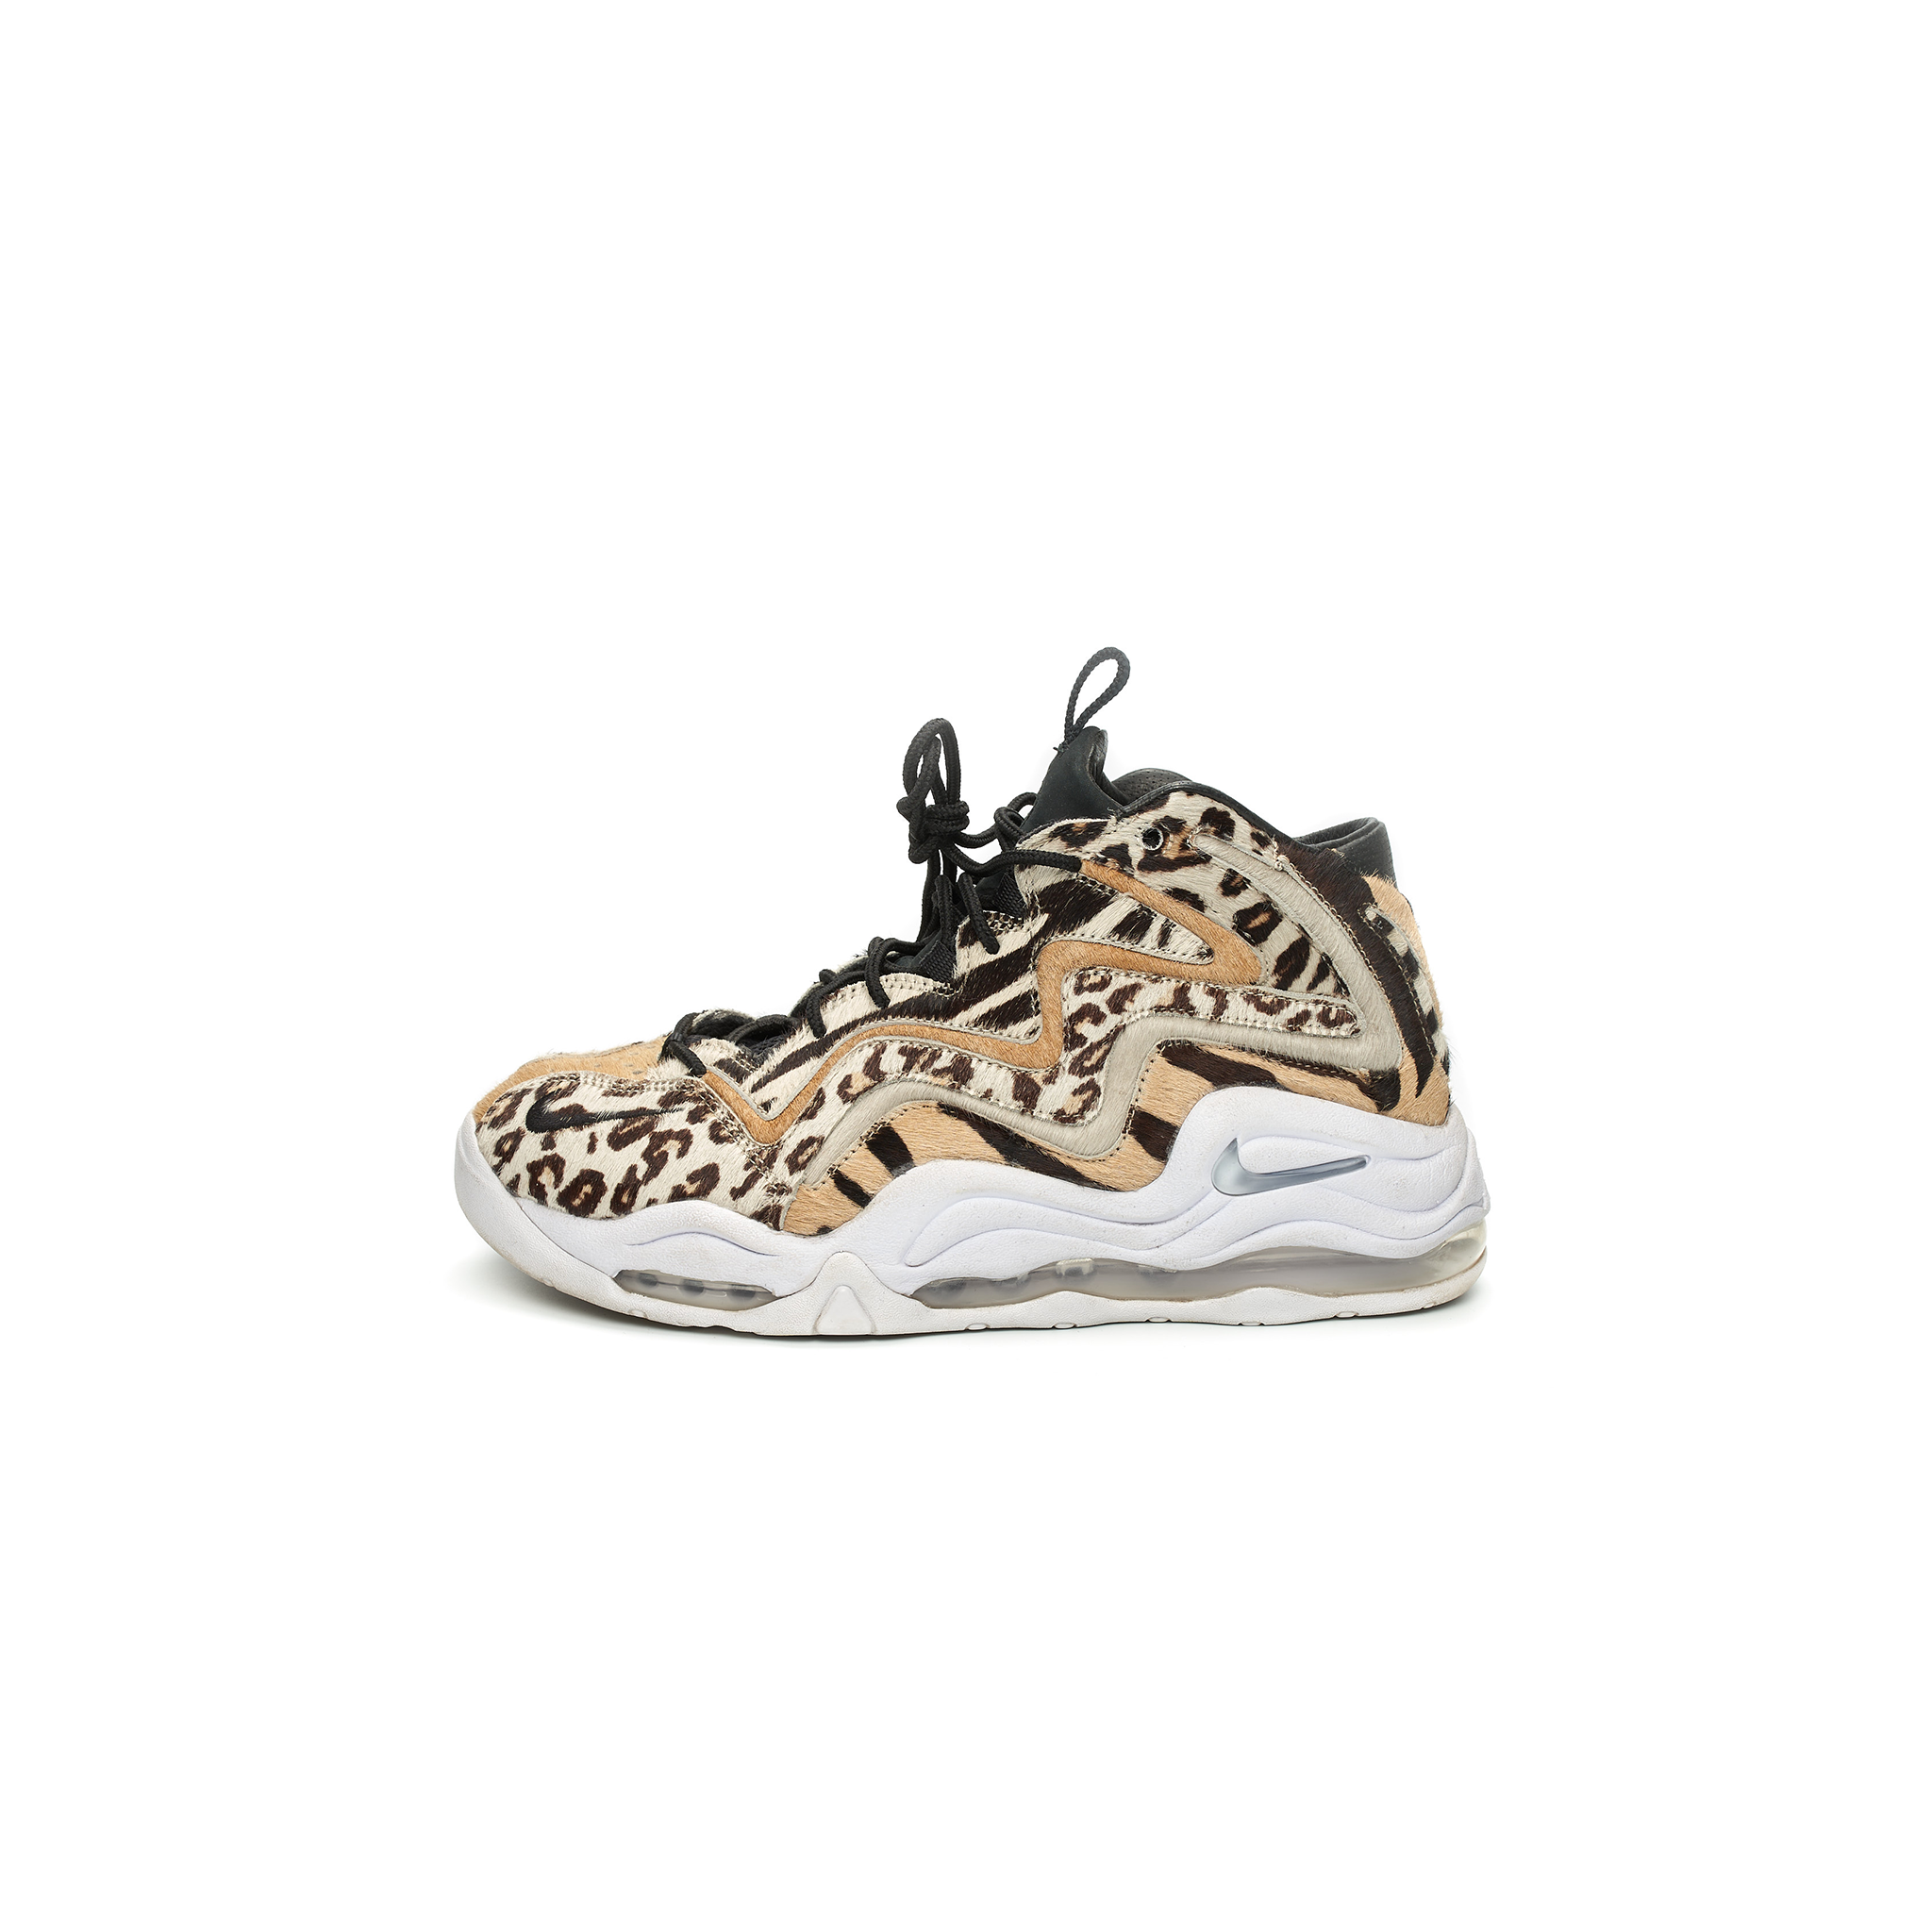 Nike Air Pippen 1 Kith Chimera Animal Print – Story Cape Town